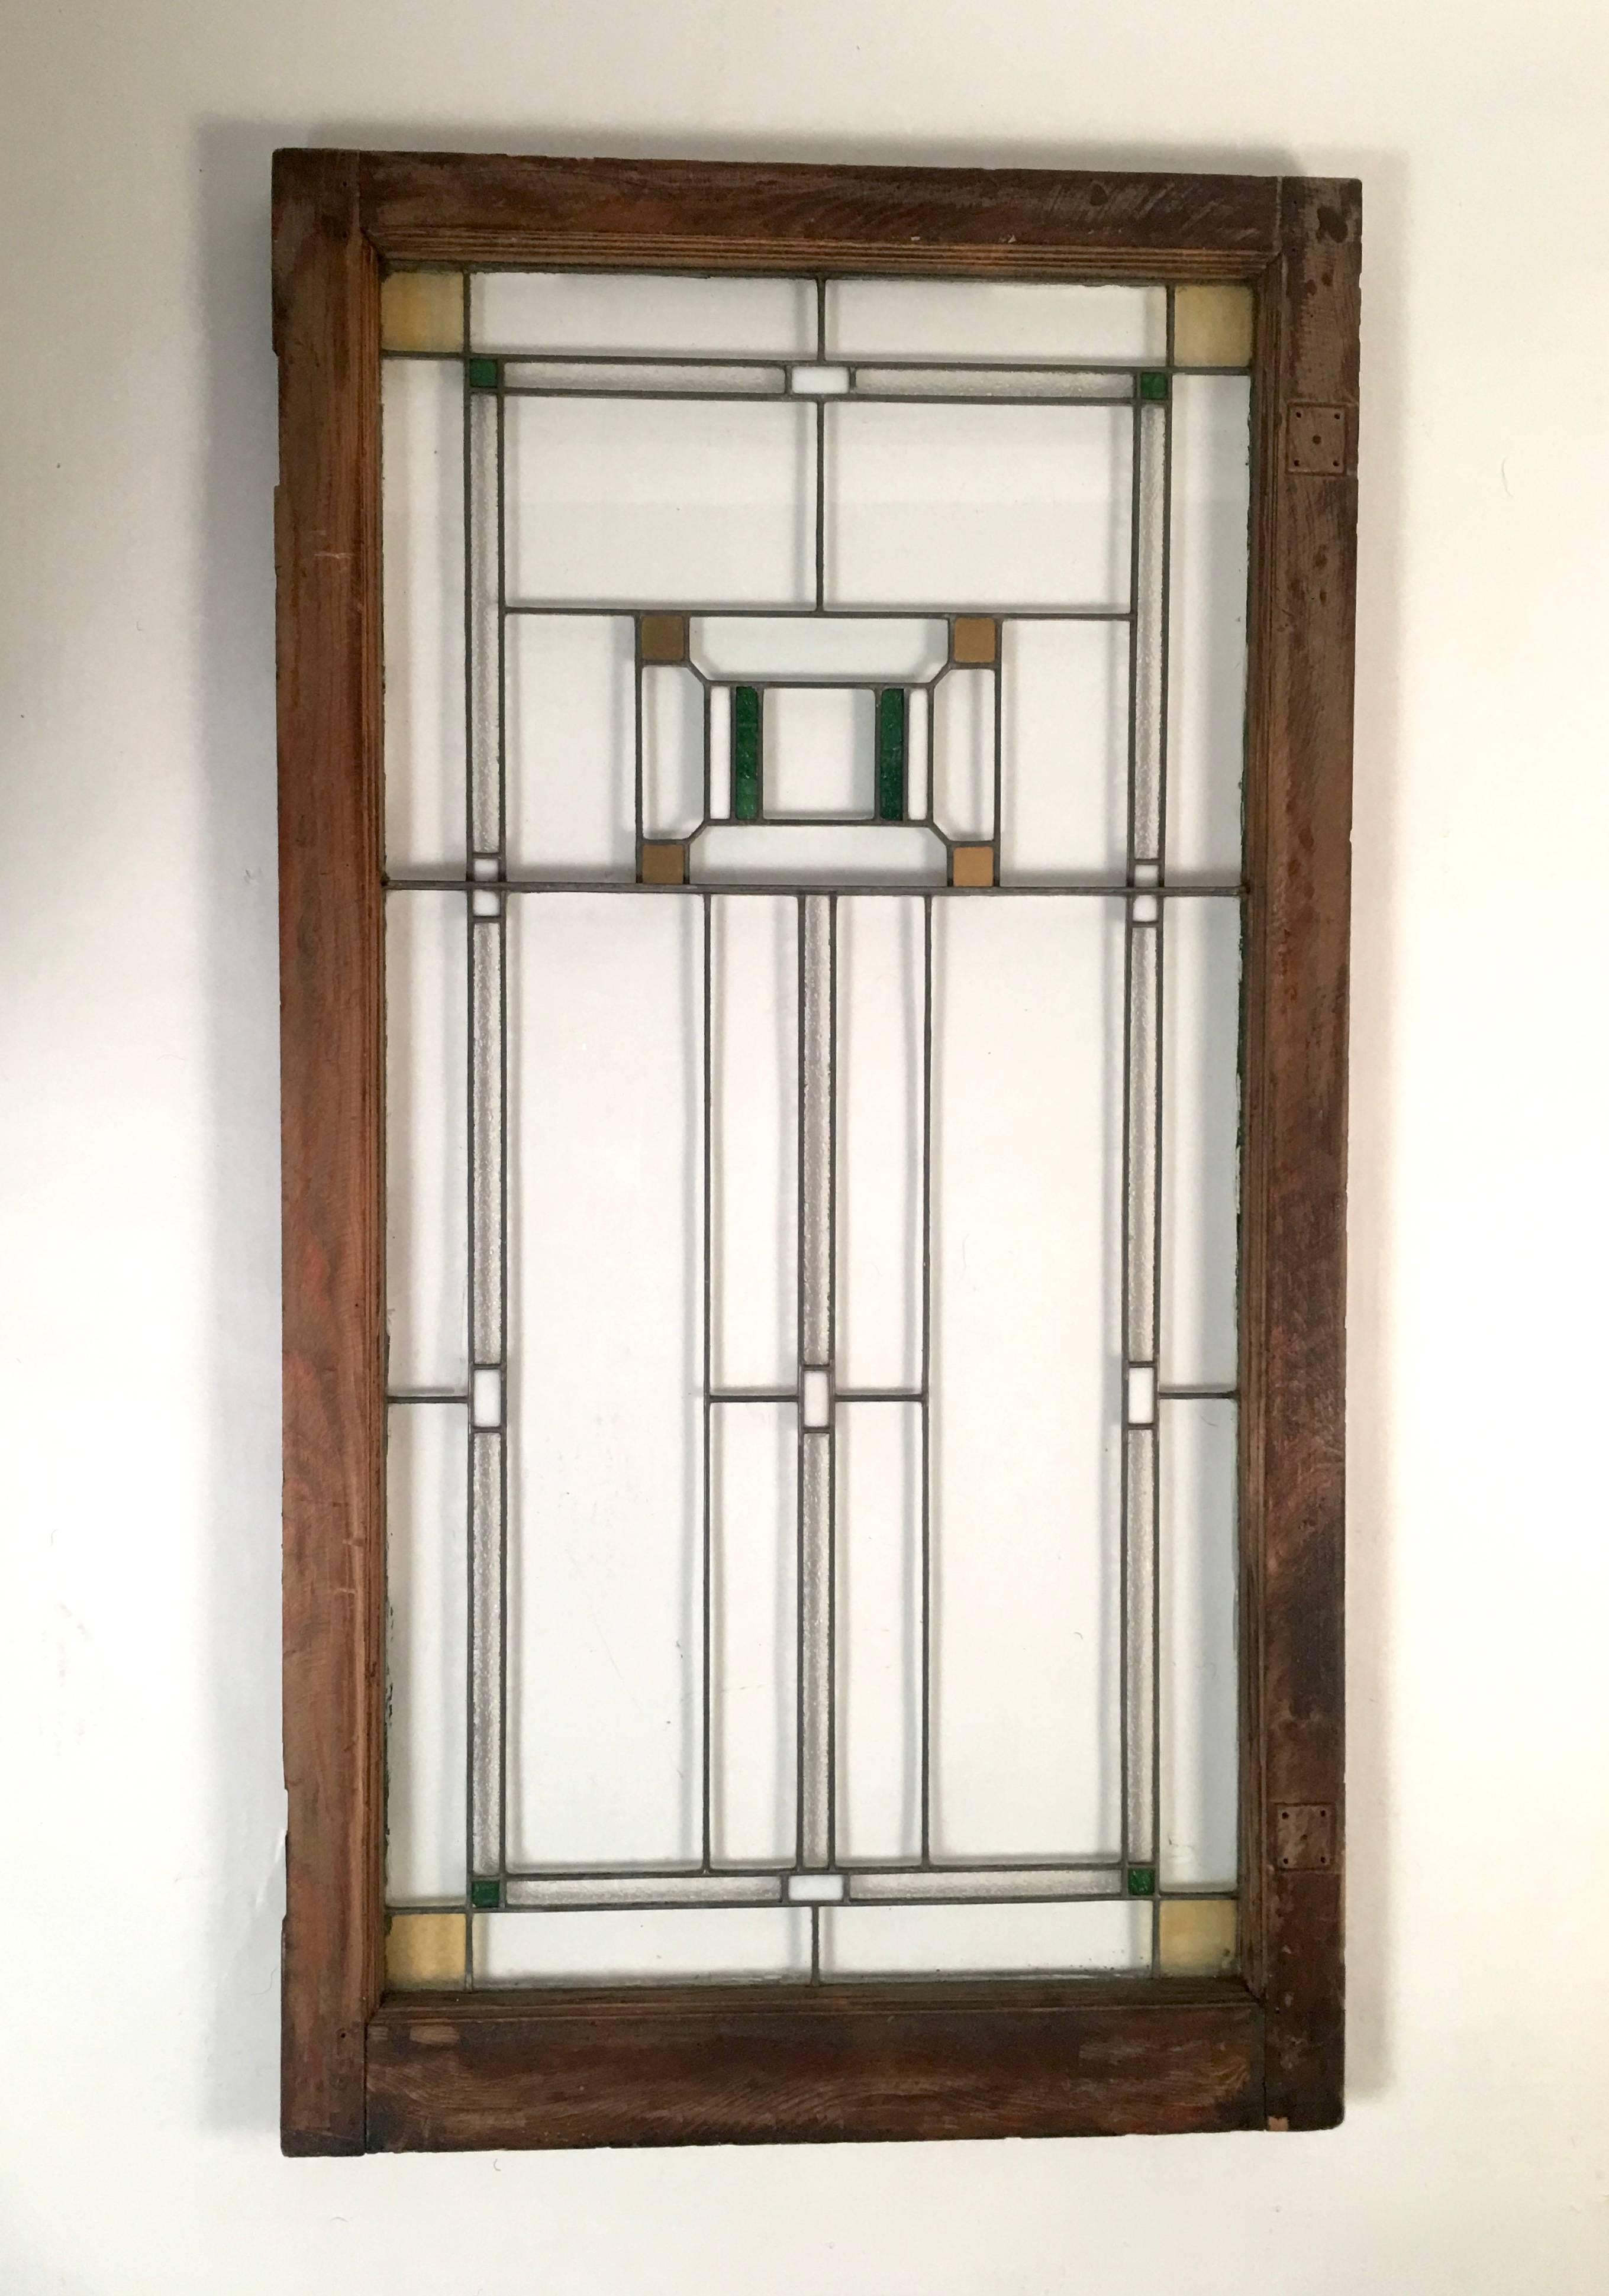 Two American Arts & Crafts period Prairie School windows, in the manner of Frank Lloyd Wright, possibly by George Grant Elmslie, who was an assistant of Louis Sullivan. Excellent condition. Clear glass, both flat and textured, with rectangles and